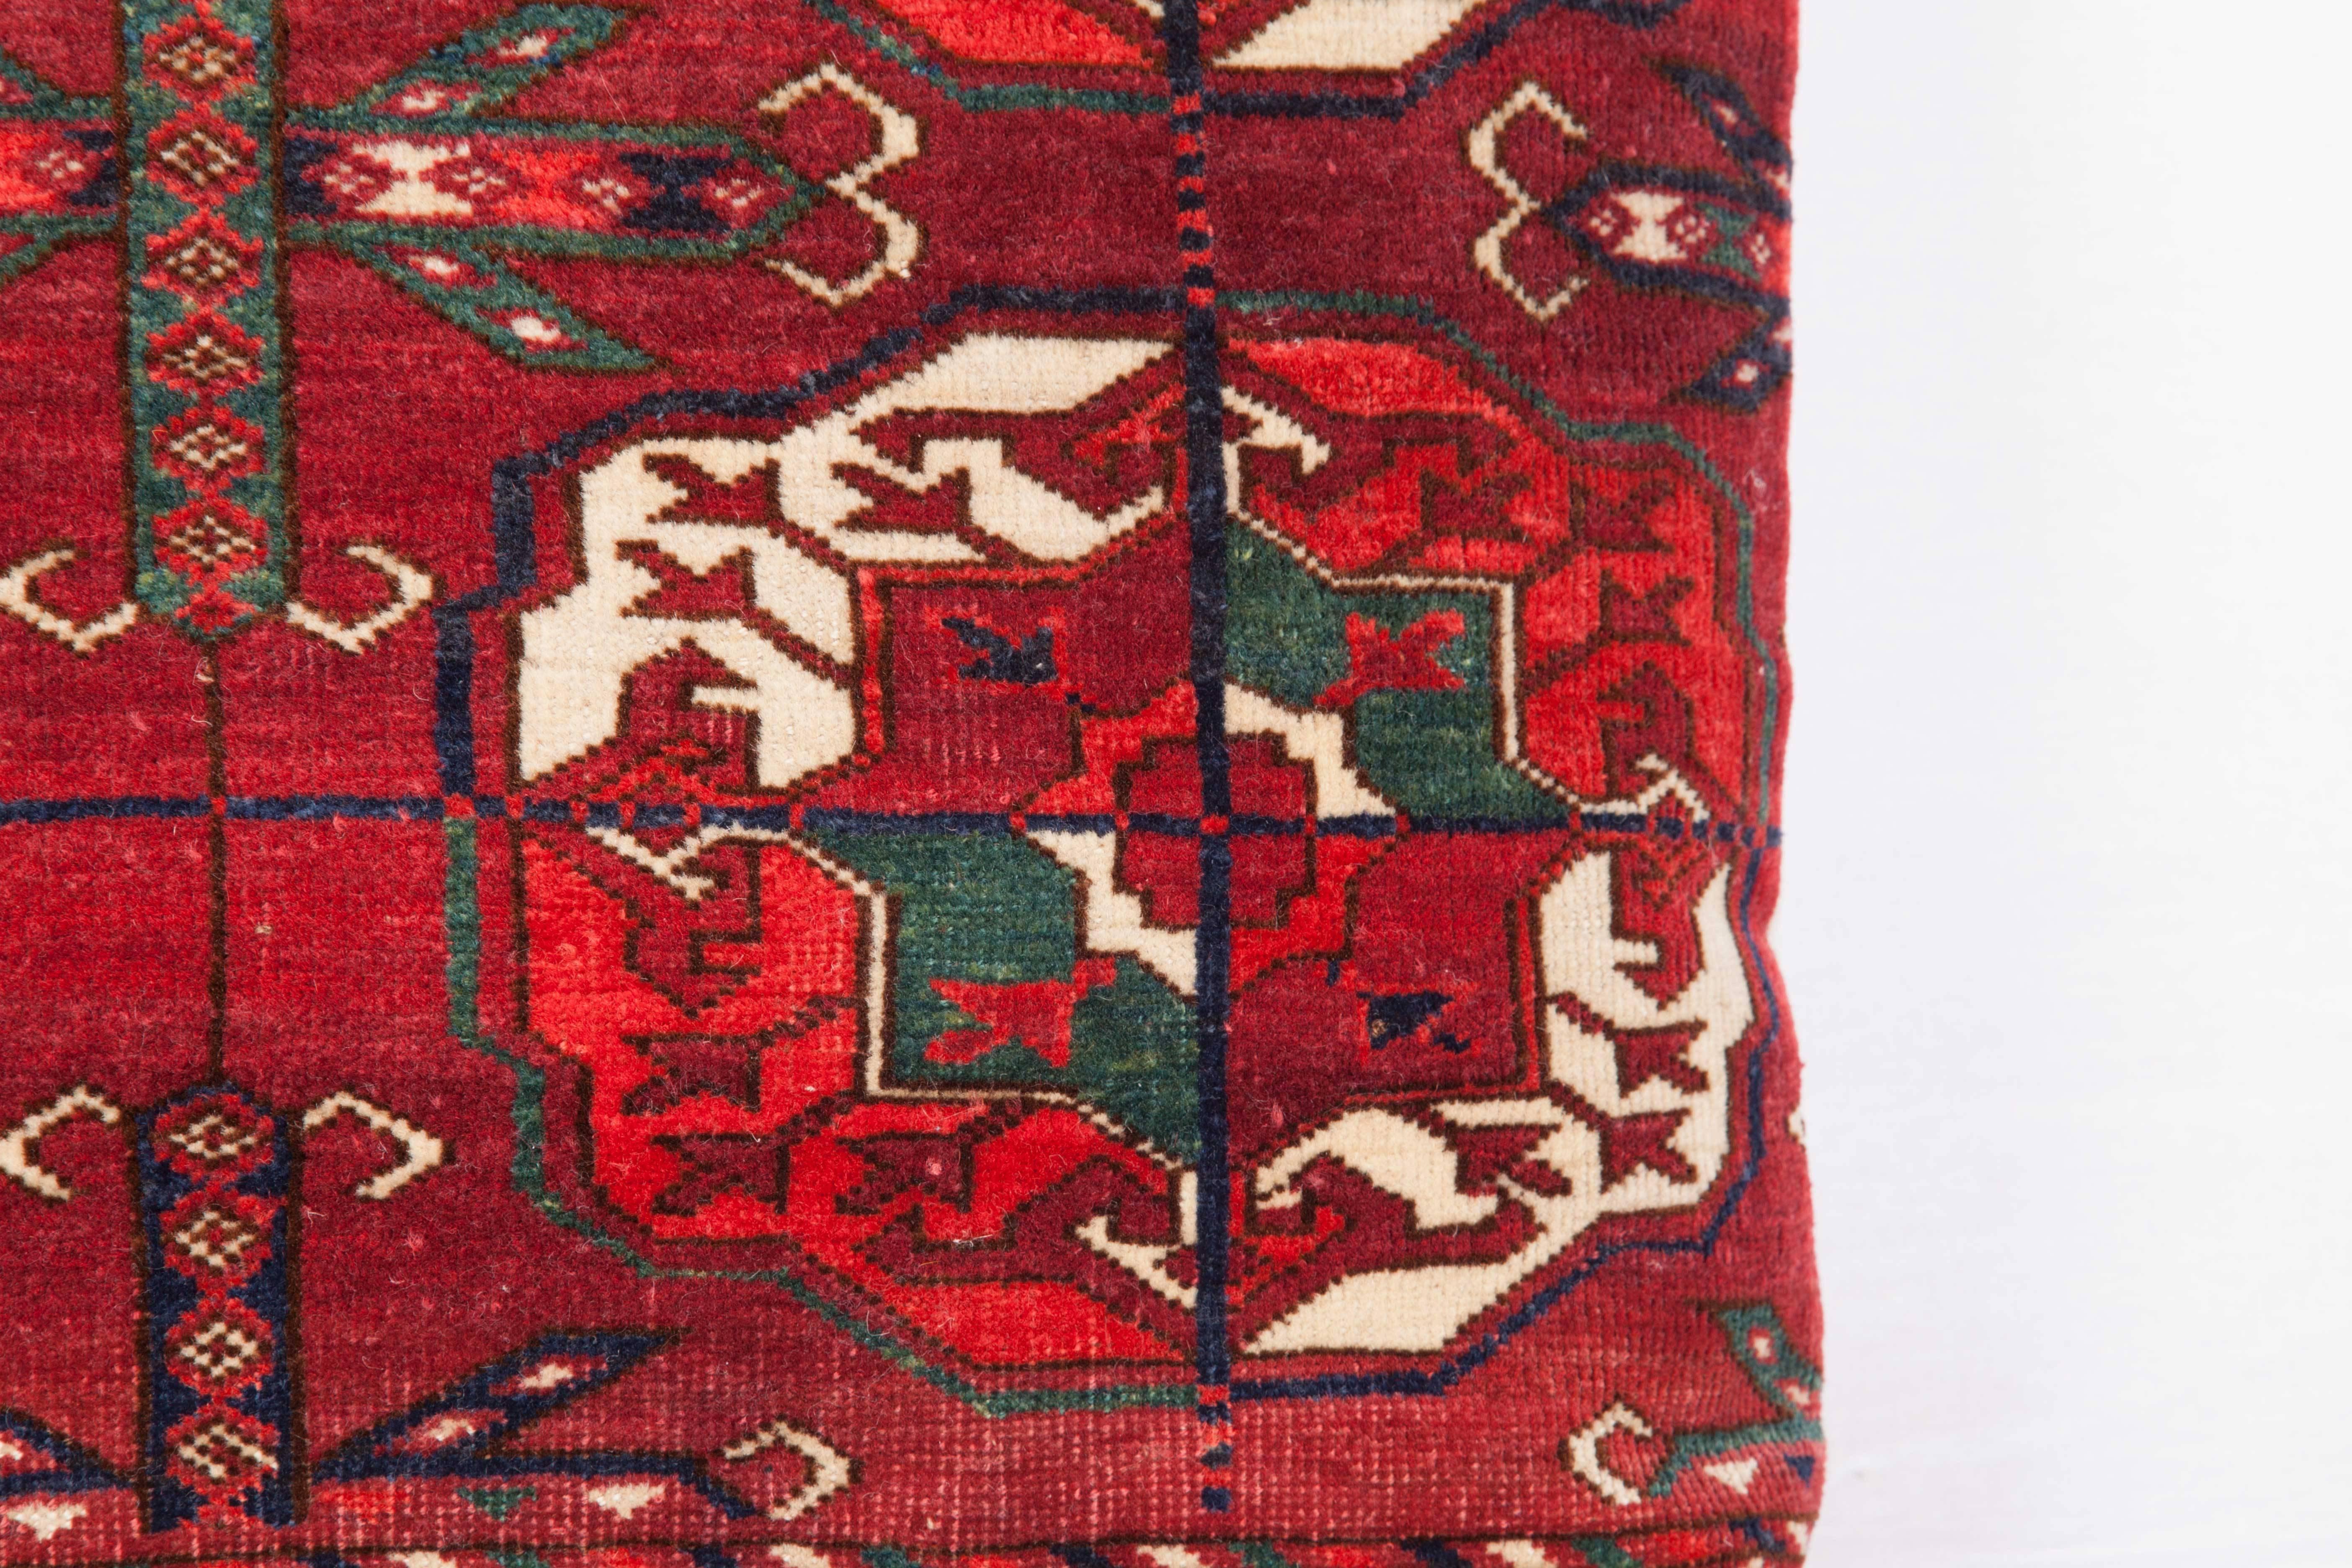 The pillow is made out of a early 19th century, Turkmen Tekke rug. It does not come with an insert but it comes with a bag made to the size and out of cotton to accommodate the filling. The backing is made of linen. Please note filling is not